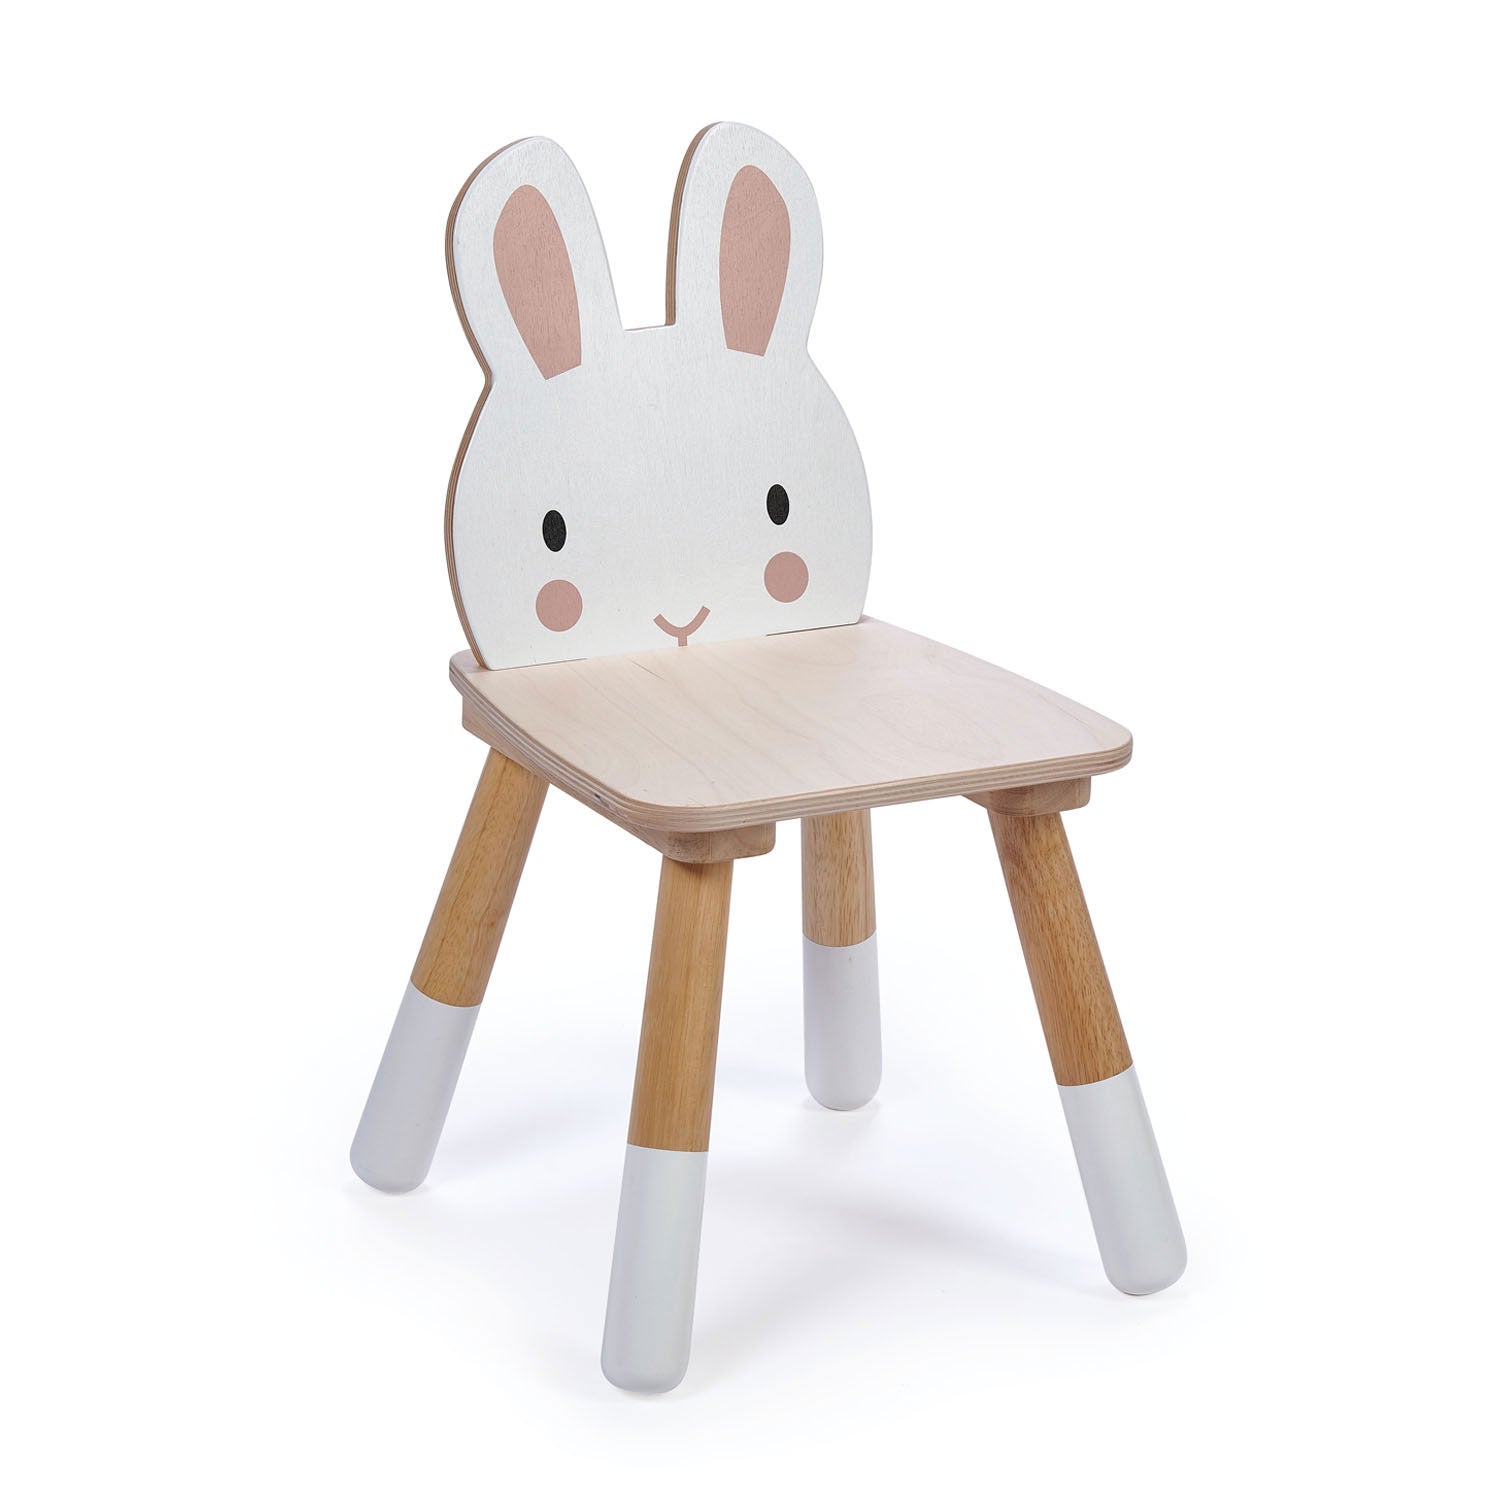 <p>A stylish rabbit chair made from top quality plywood.</p>
<p>Age range: 3 Years And Older  </p>
<p> Product size: 11.8 x 11.8 x 20.28”  </p>
<p>Seat height: 10.7&quot;  </p>
<p> Weight: 4.62 lbs  </p>
<p>Weight limit: 30 kgs </p>
<p><strong>Self assembly required.</strong></p>
